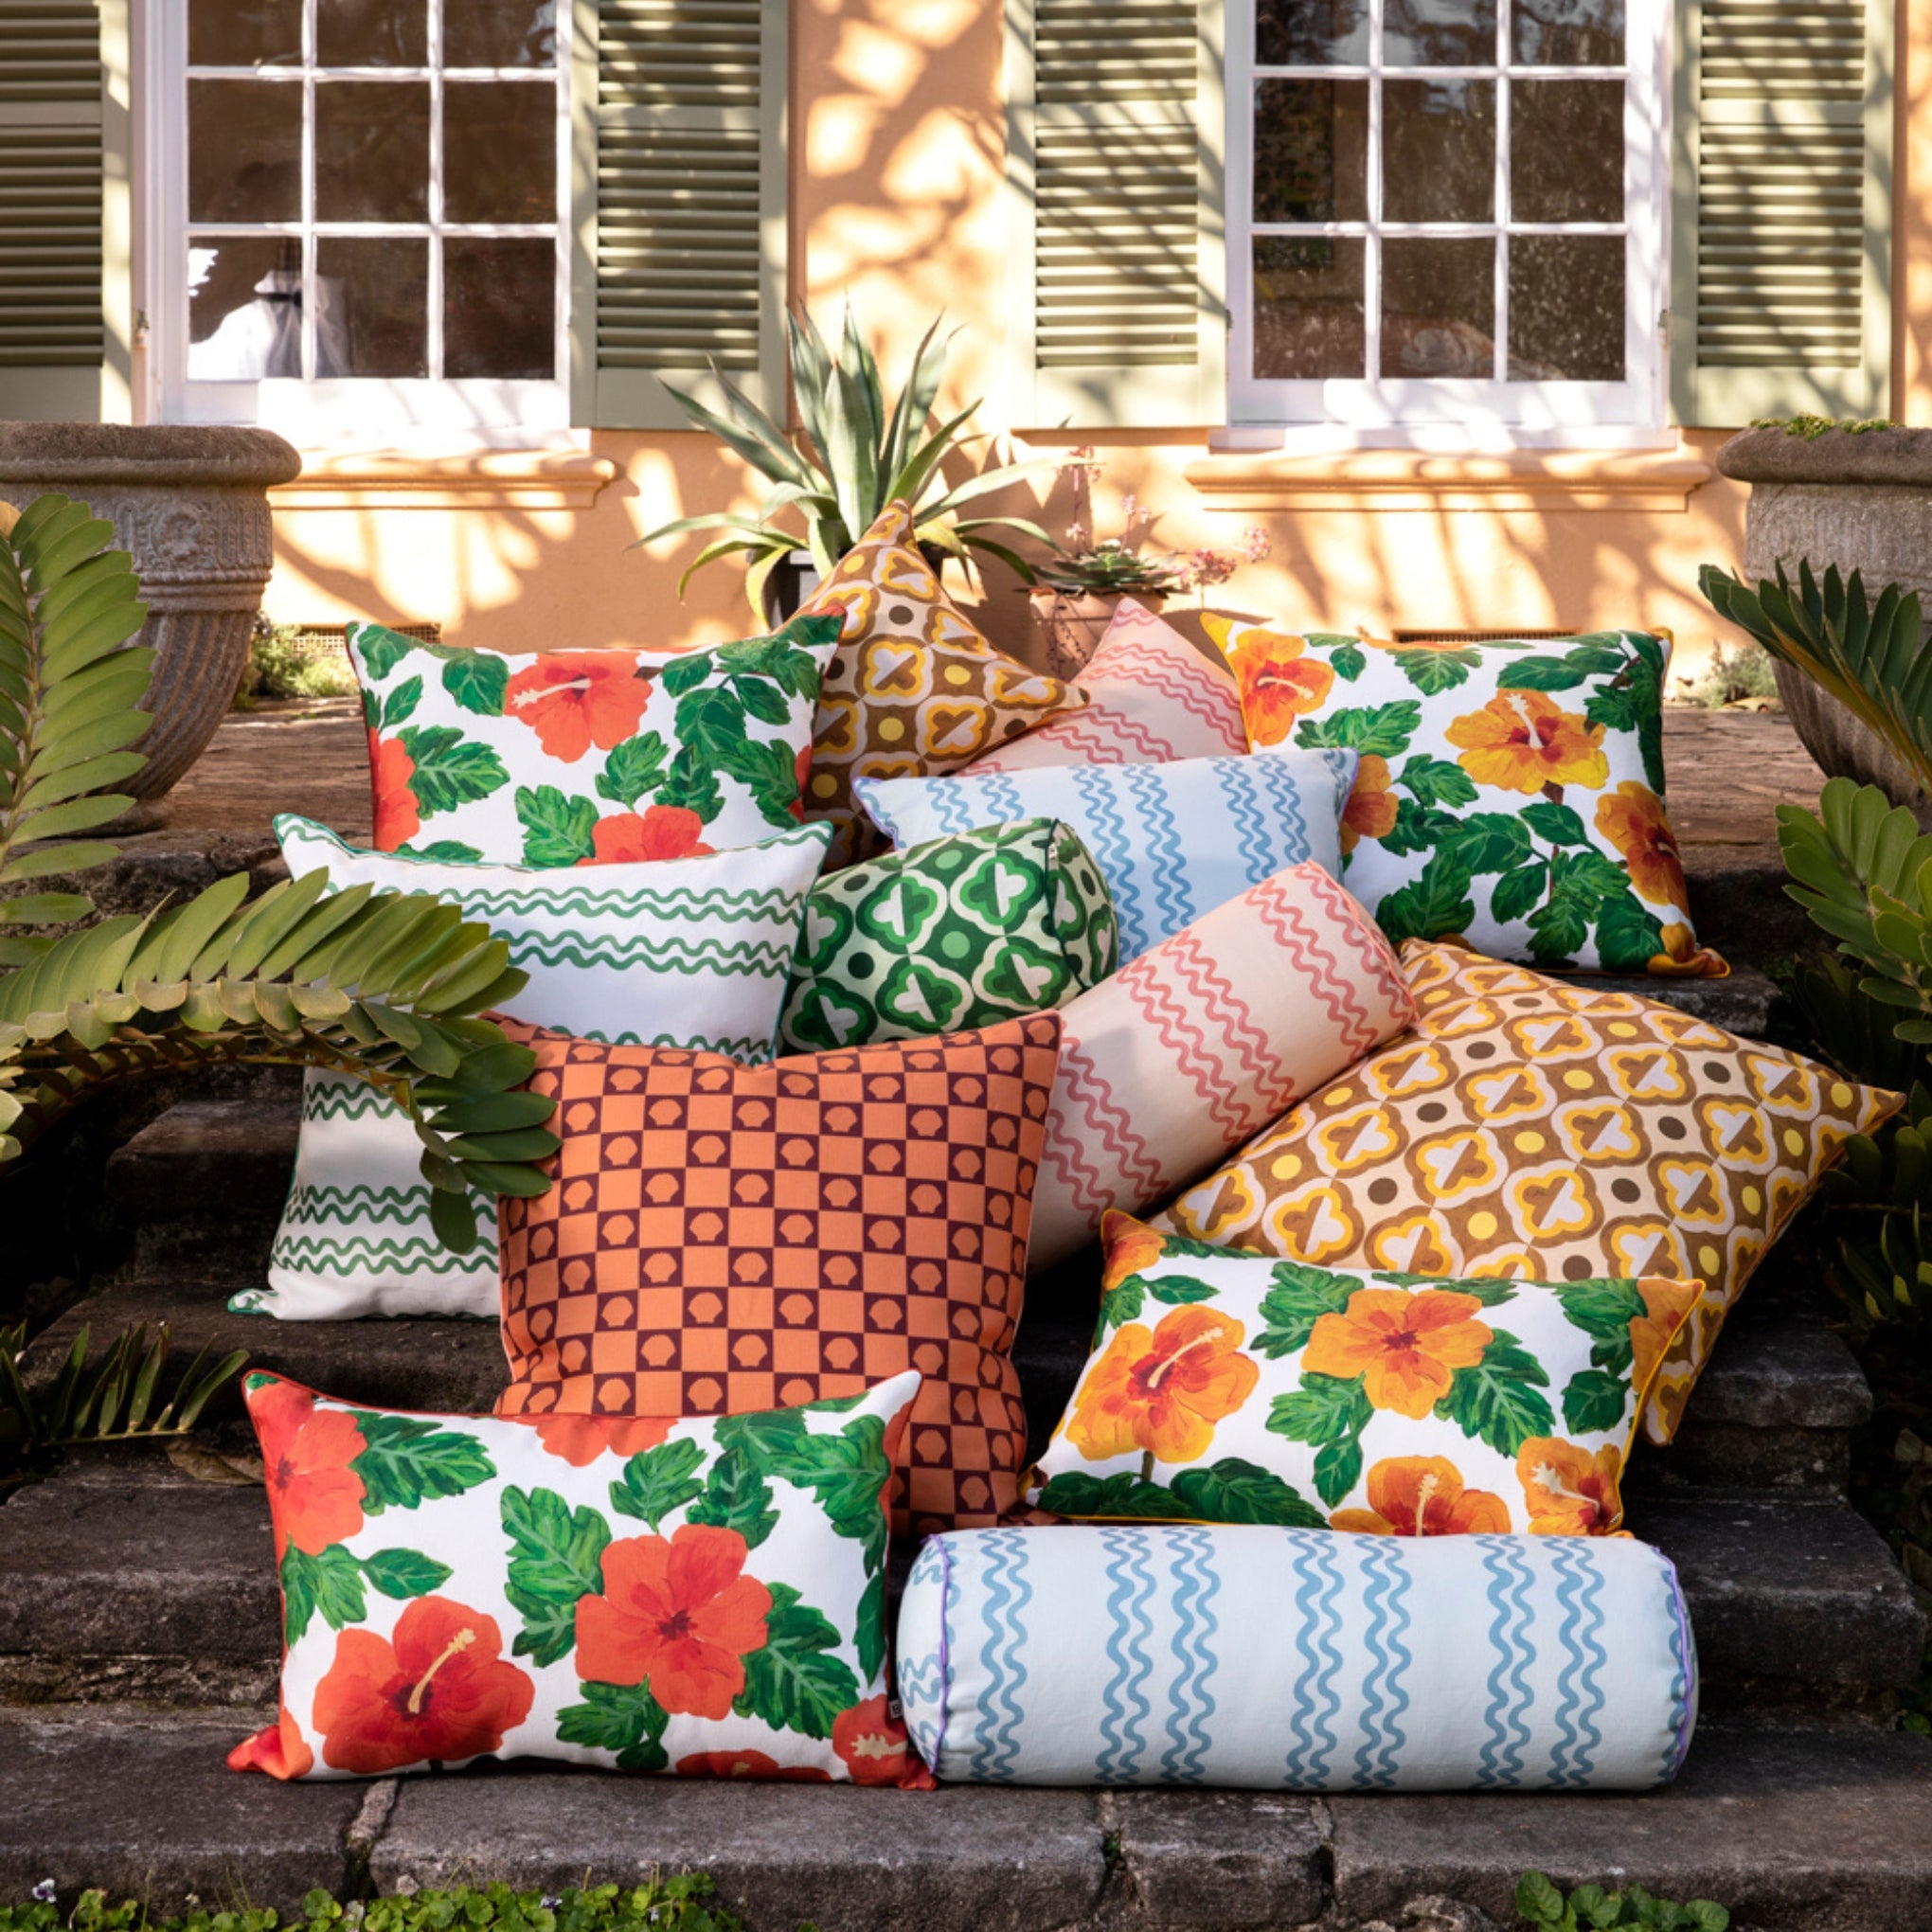 Shell Check Coral 60x40cm Outdoor Cushion